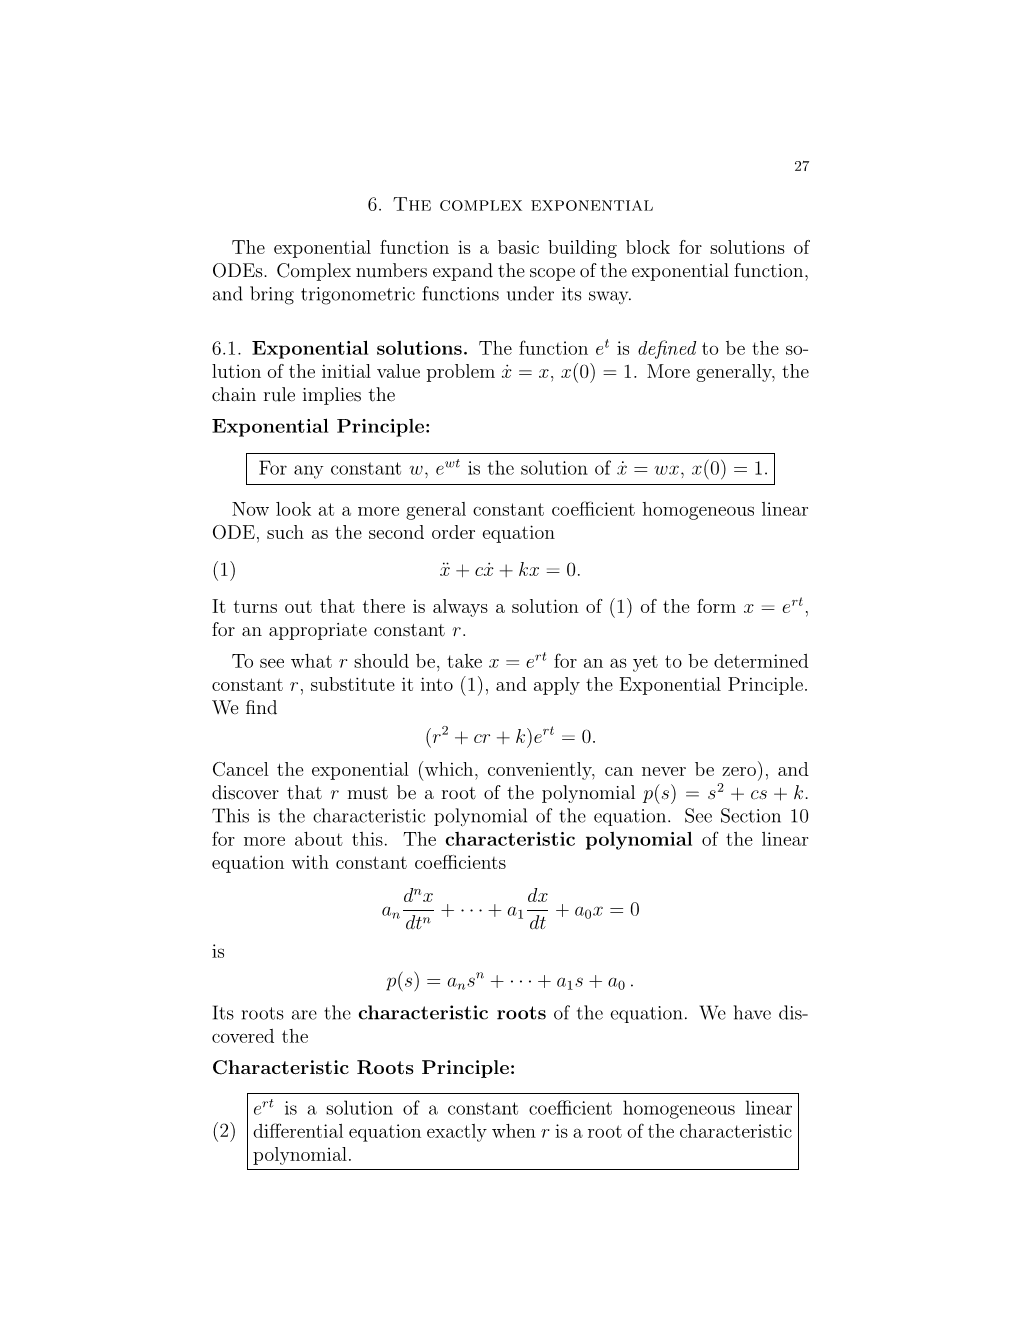 18.03 Differential Equations, Supplementary Notes Ch. 6